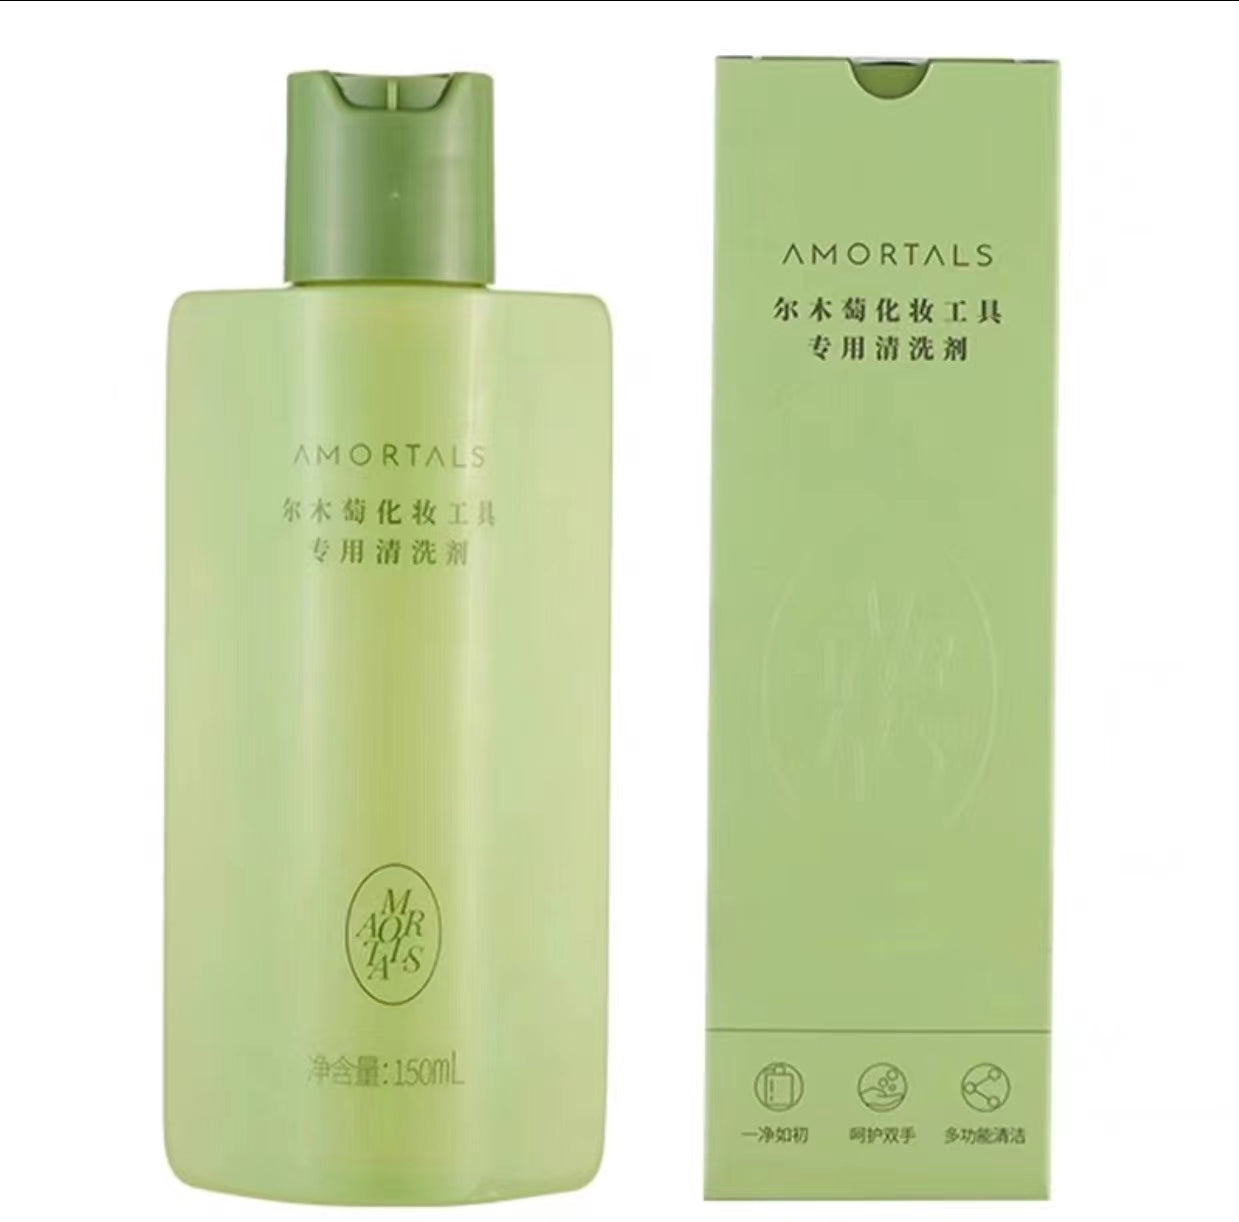 Amortals Puff Cleaner Special Cleaning Agent for Cosmetic Tools 150ml 尔木萄粉扑专用海绵彩妆美妆蛋清洁液粉扑清洗剂